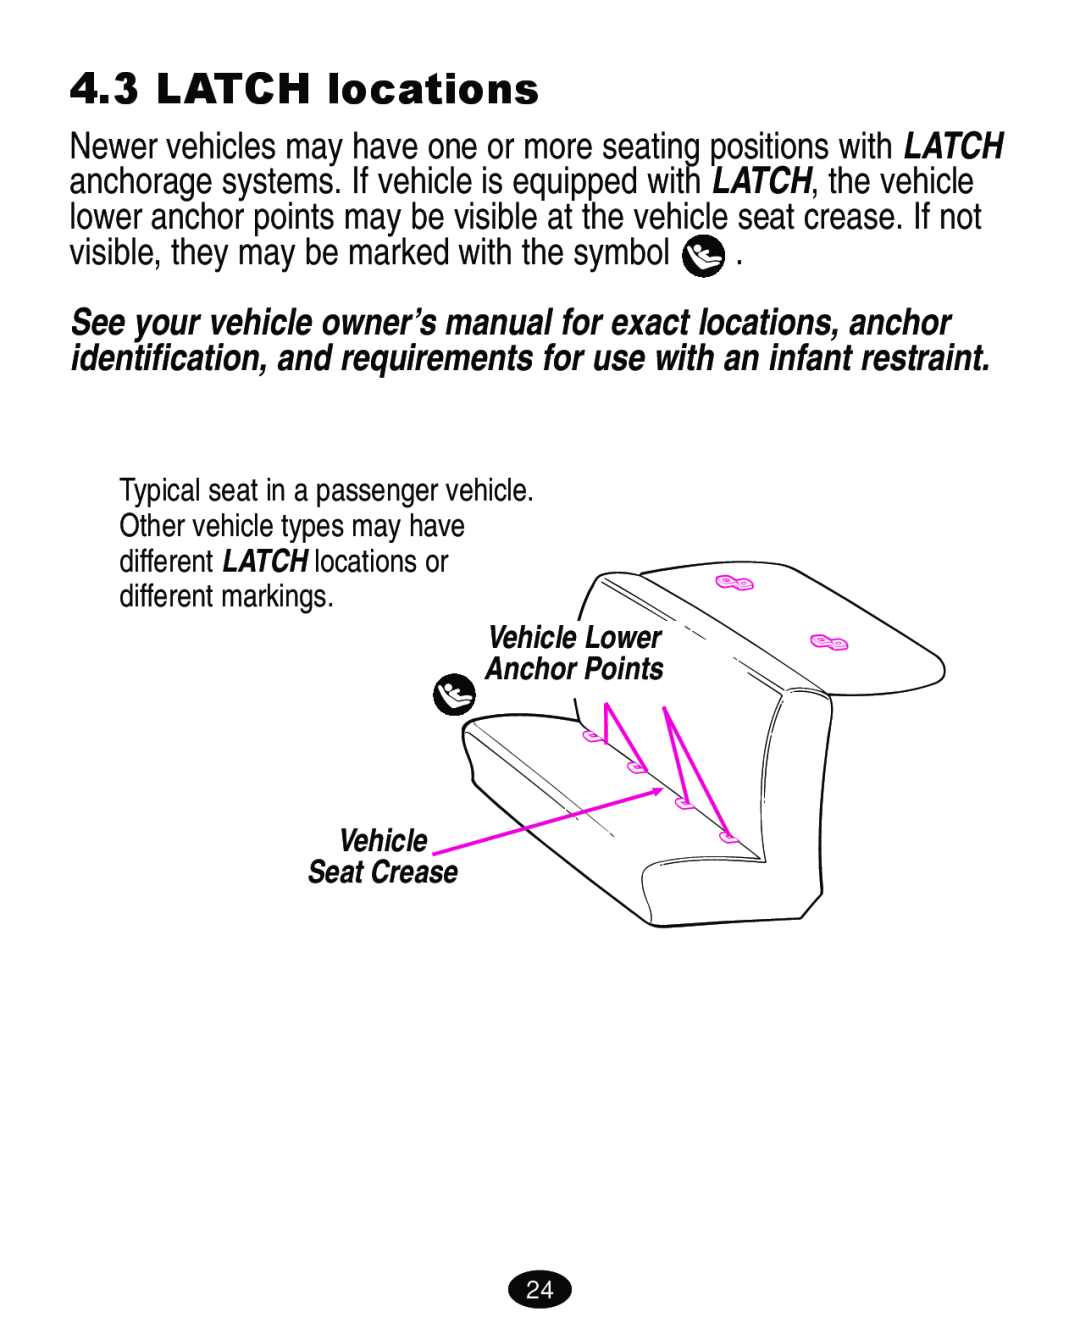 Graco 4460402 manual LATCH locations, visible, they may be marked with the symbol 